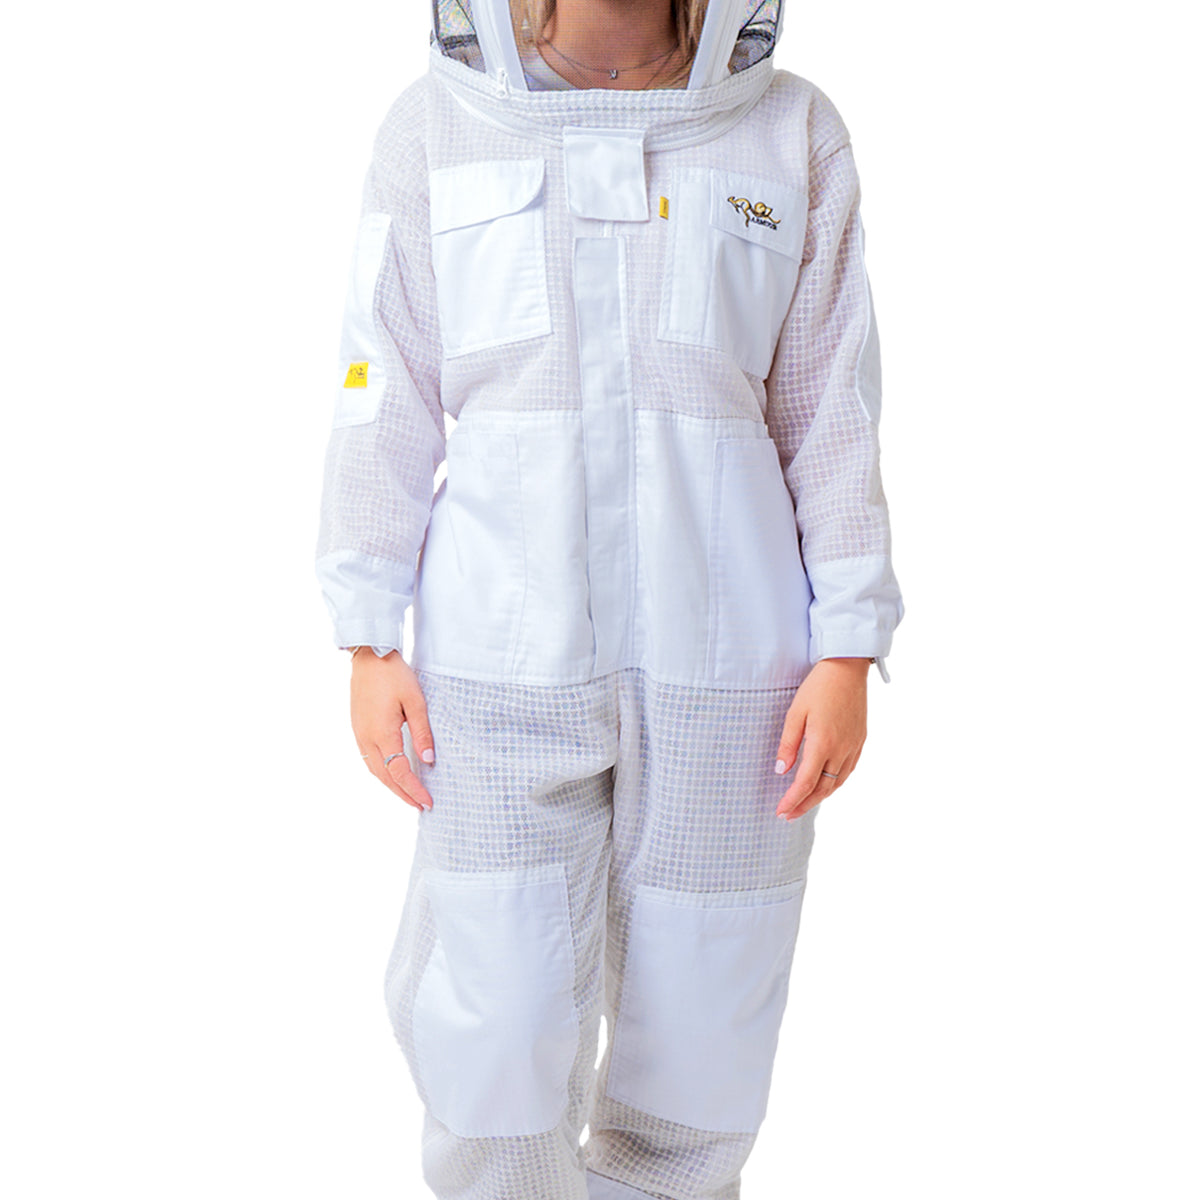 OZ ARMOUR 3 Layer Mesh Ventilated Beekeeping Suit With Fencing Veil